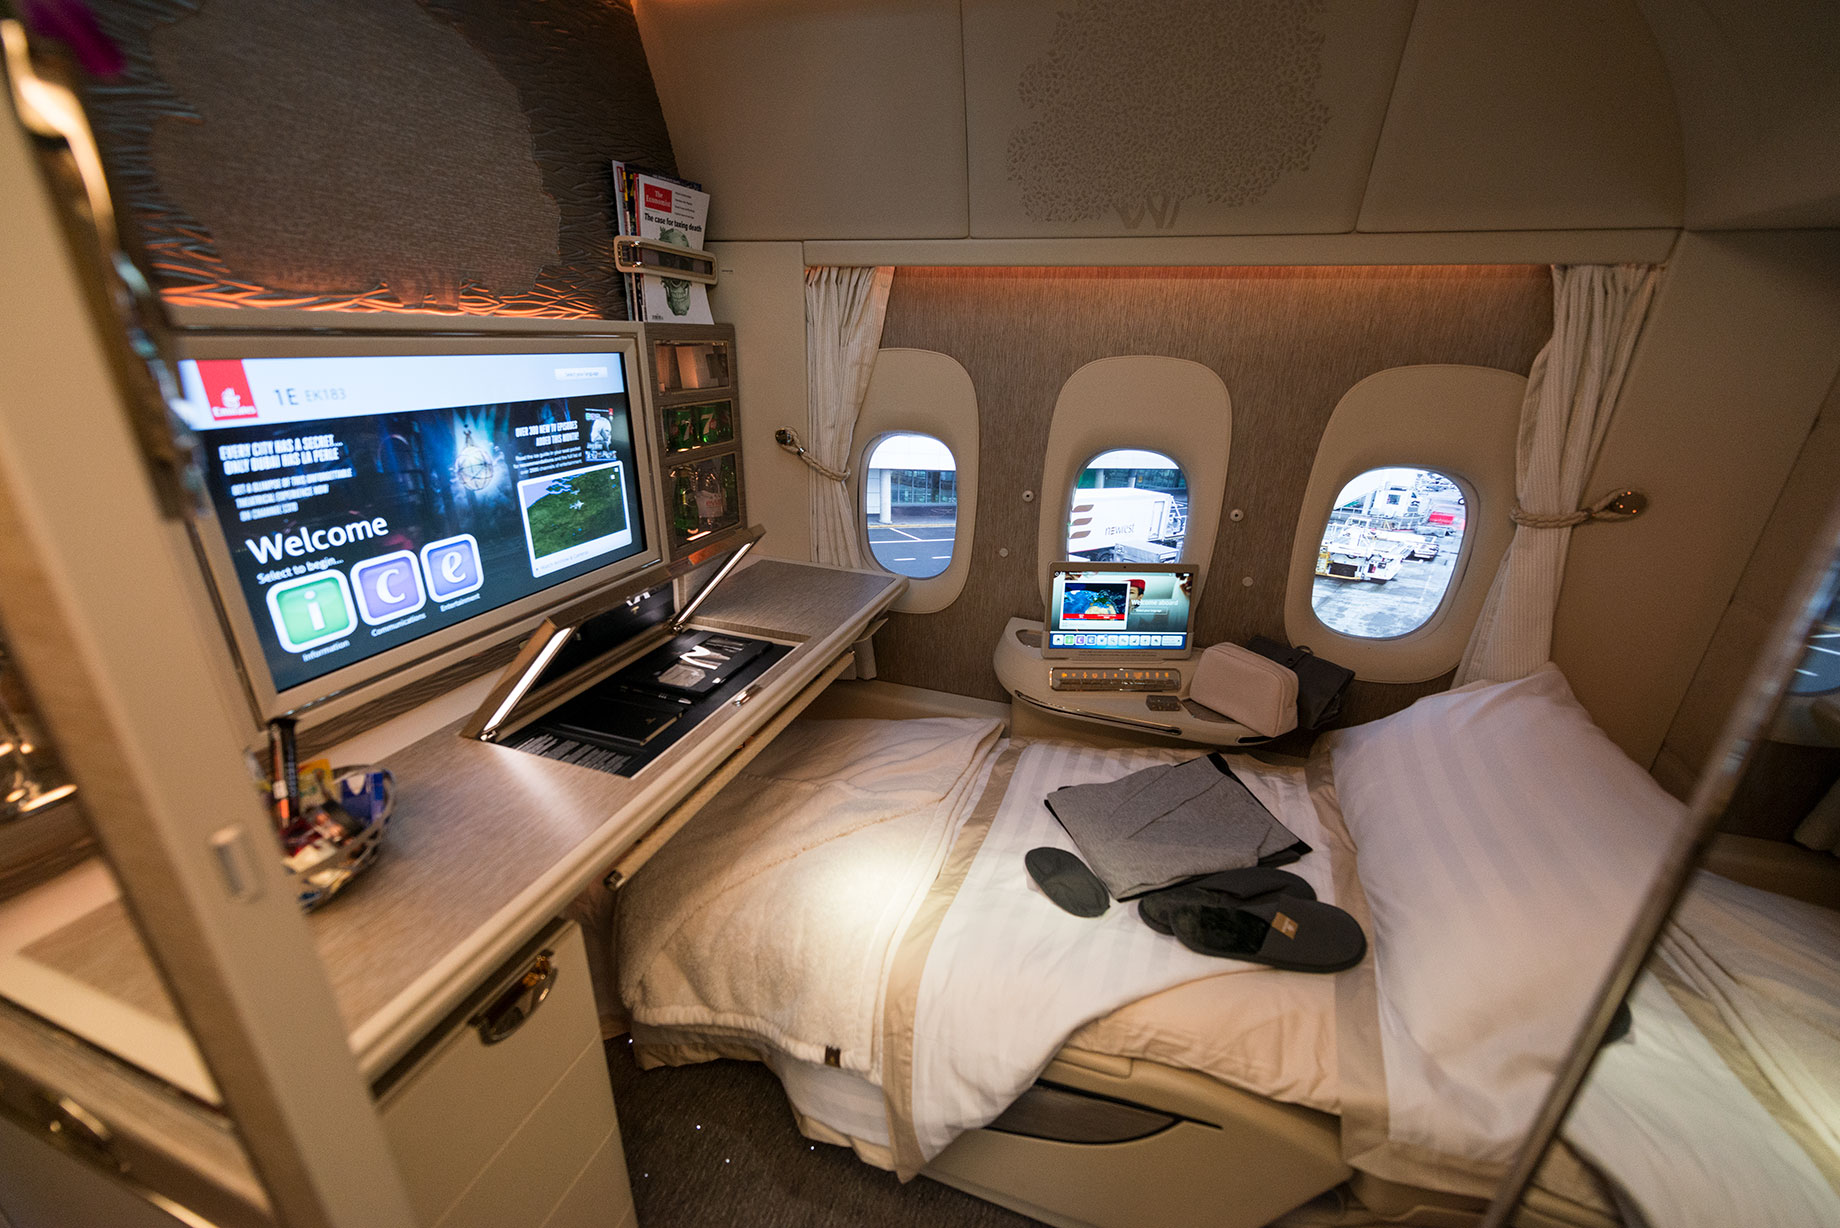 Emirates A380 First Class Suite